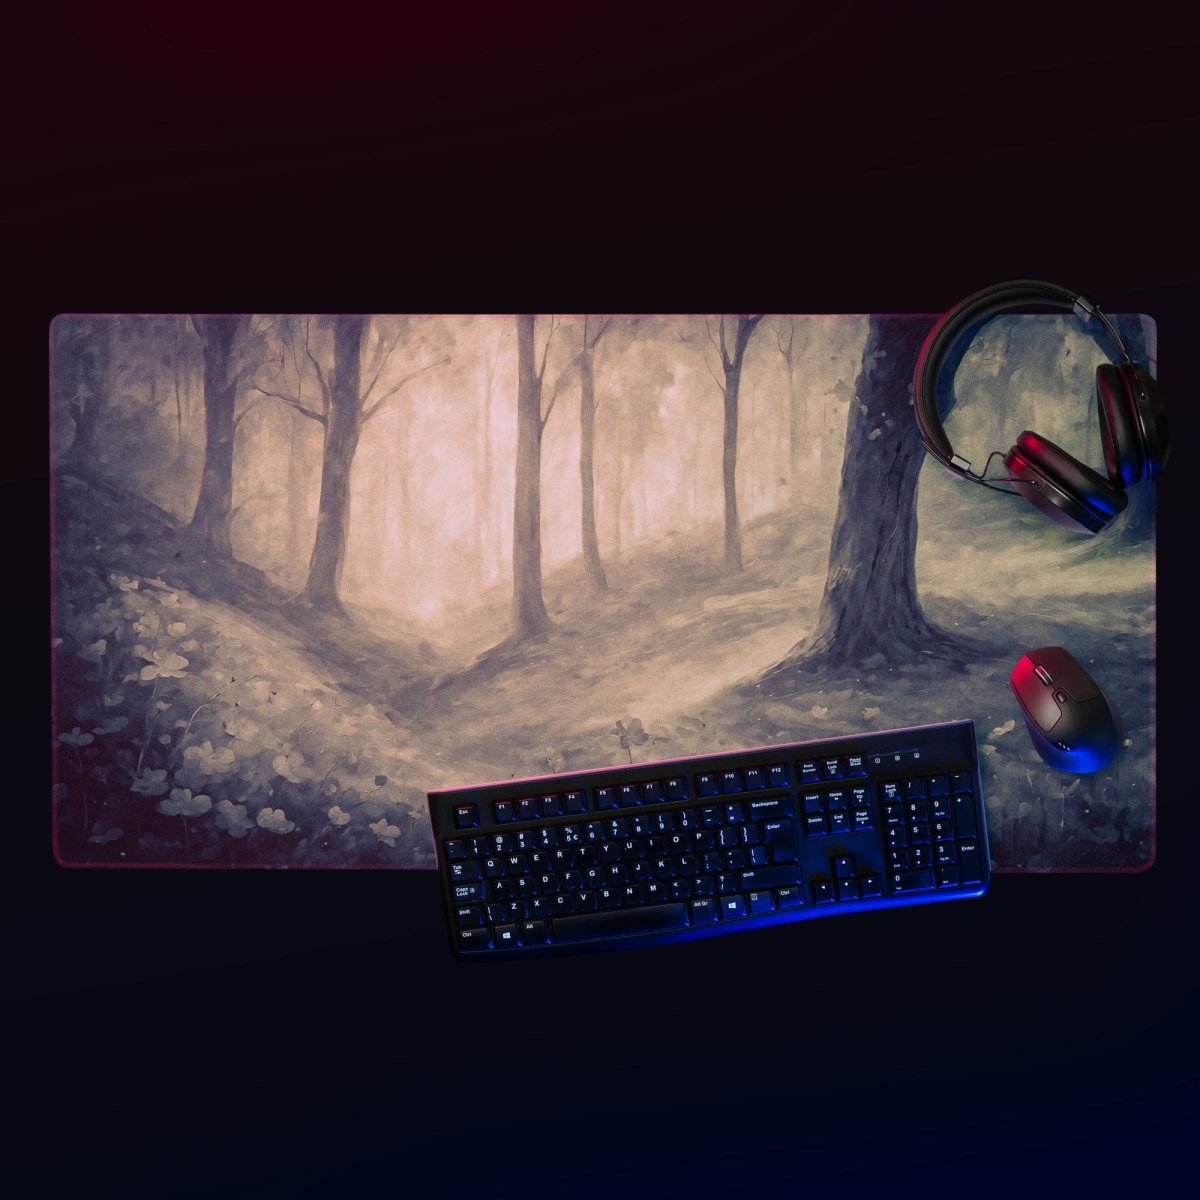 Smog in the woods - Gaming mouse pad - Ever colorful